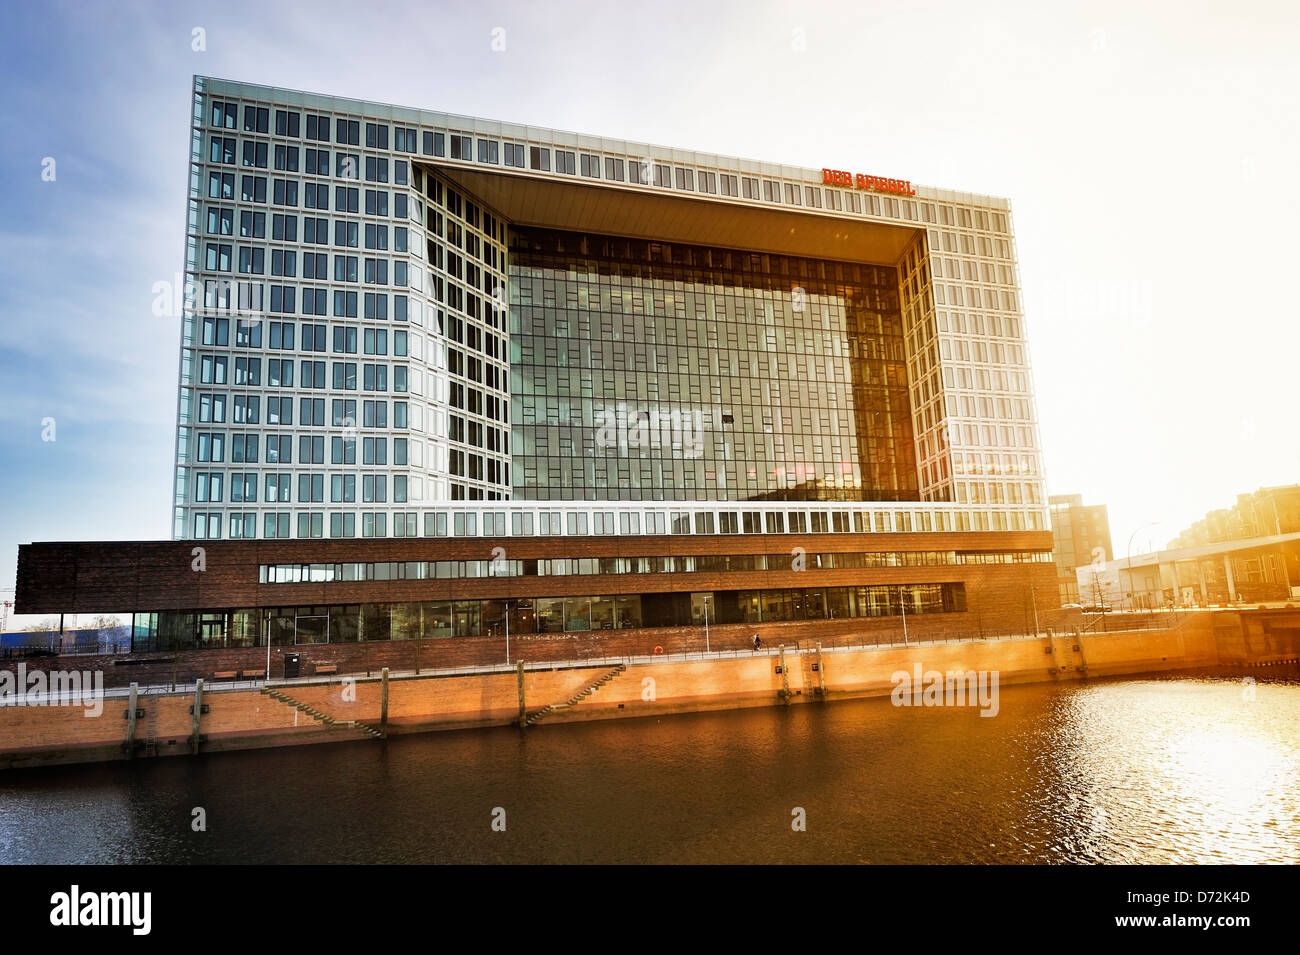 Spiegel publishing company building in the Ericusspitze in the harbour city of Hamburg, Germany, Europe Stock Photo